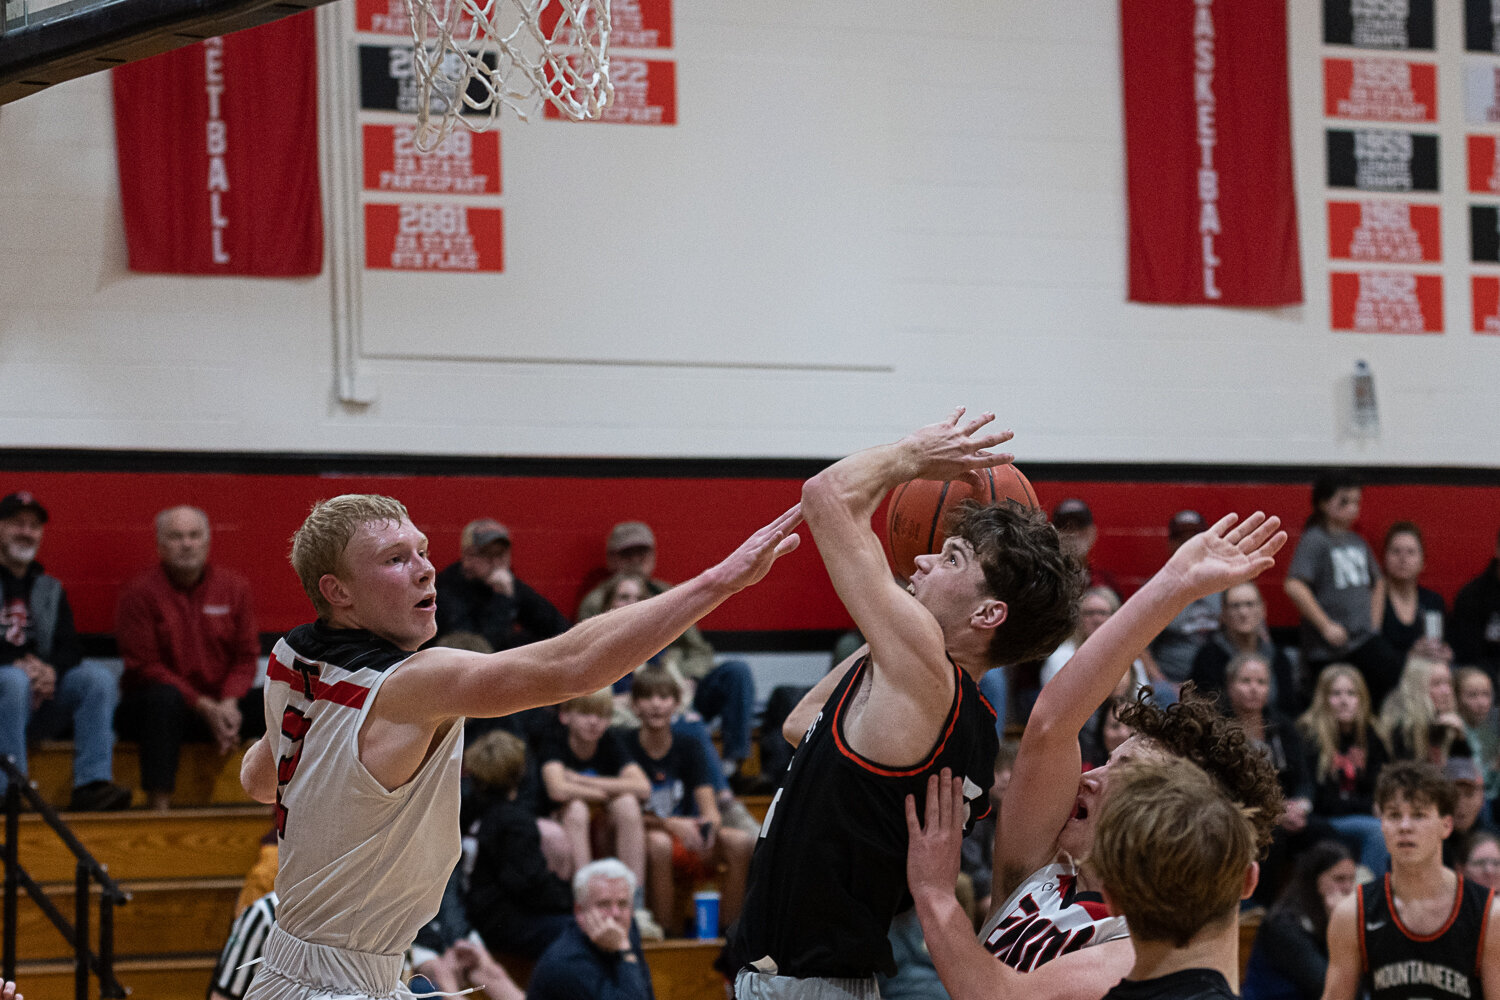 Jake Meldrum draws contact and a foul during Rainier's win over the Tenino on Nov. 30.